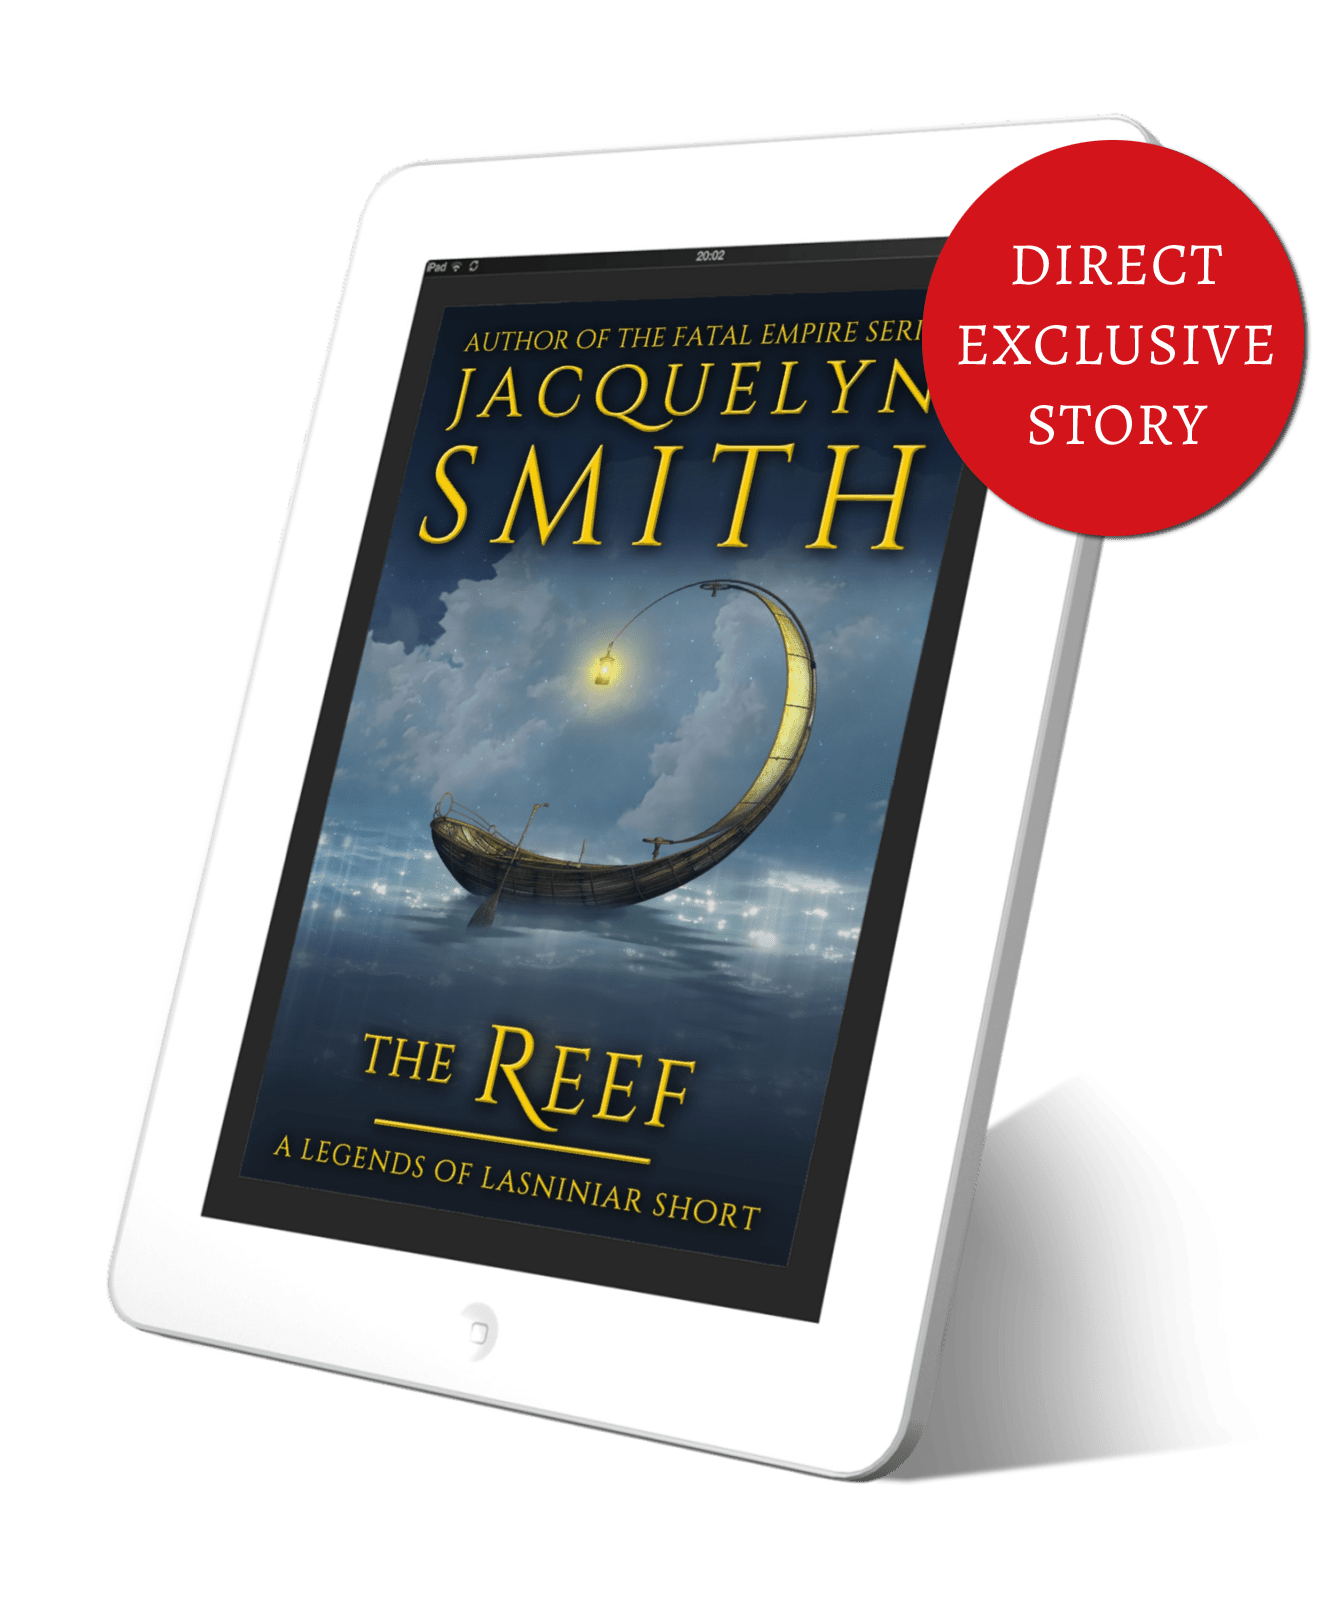 The Reef: A Legends of Lasniniar Short (Direct Exclusive) - Jacquelyn Smith Books